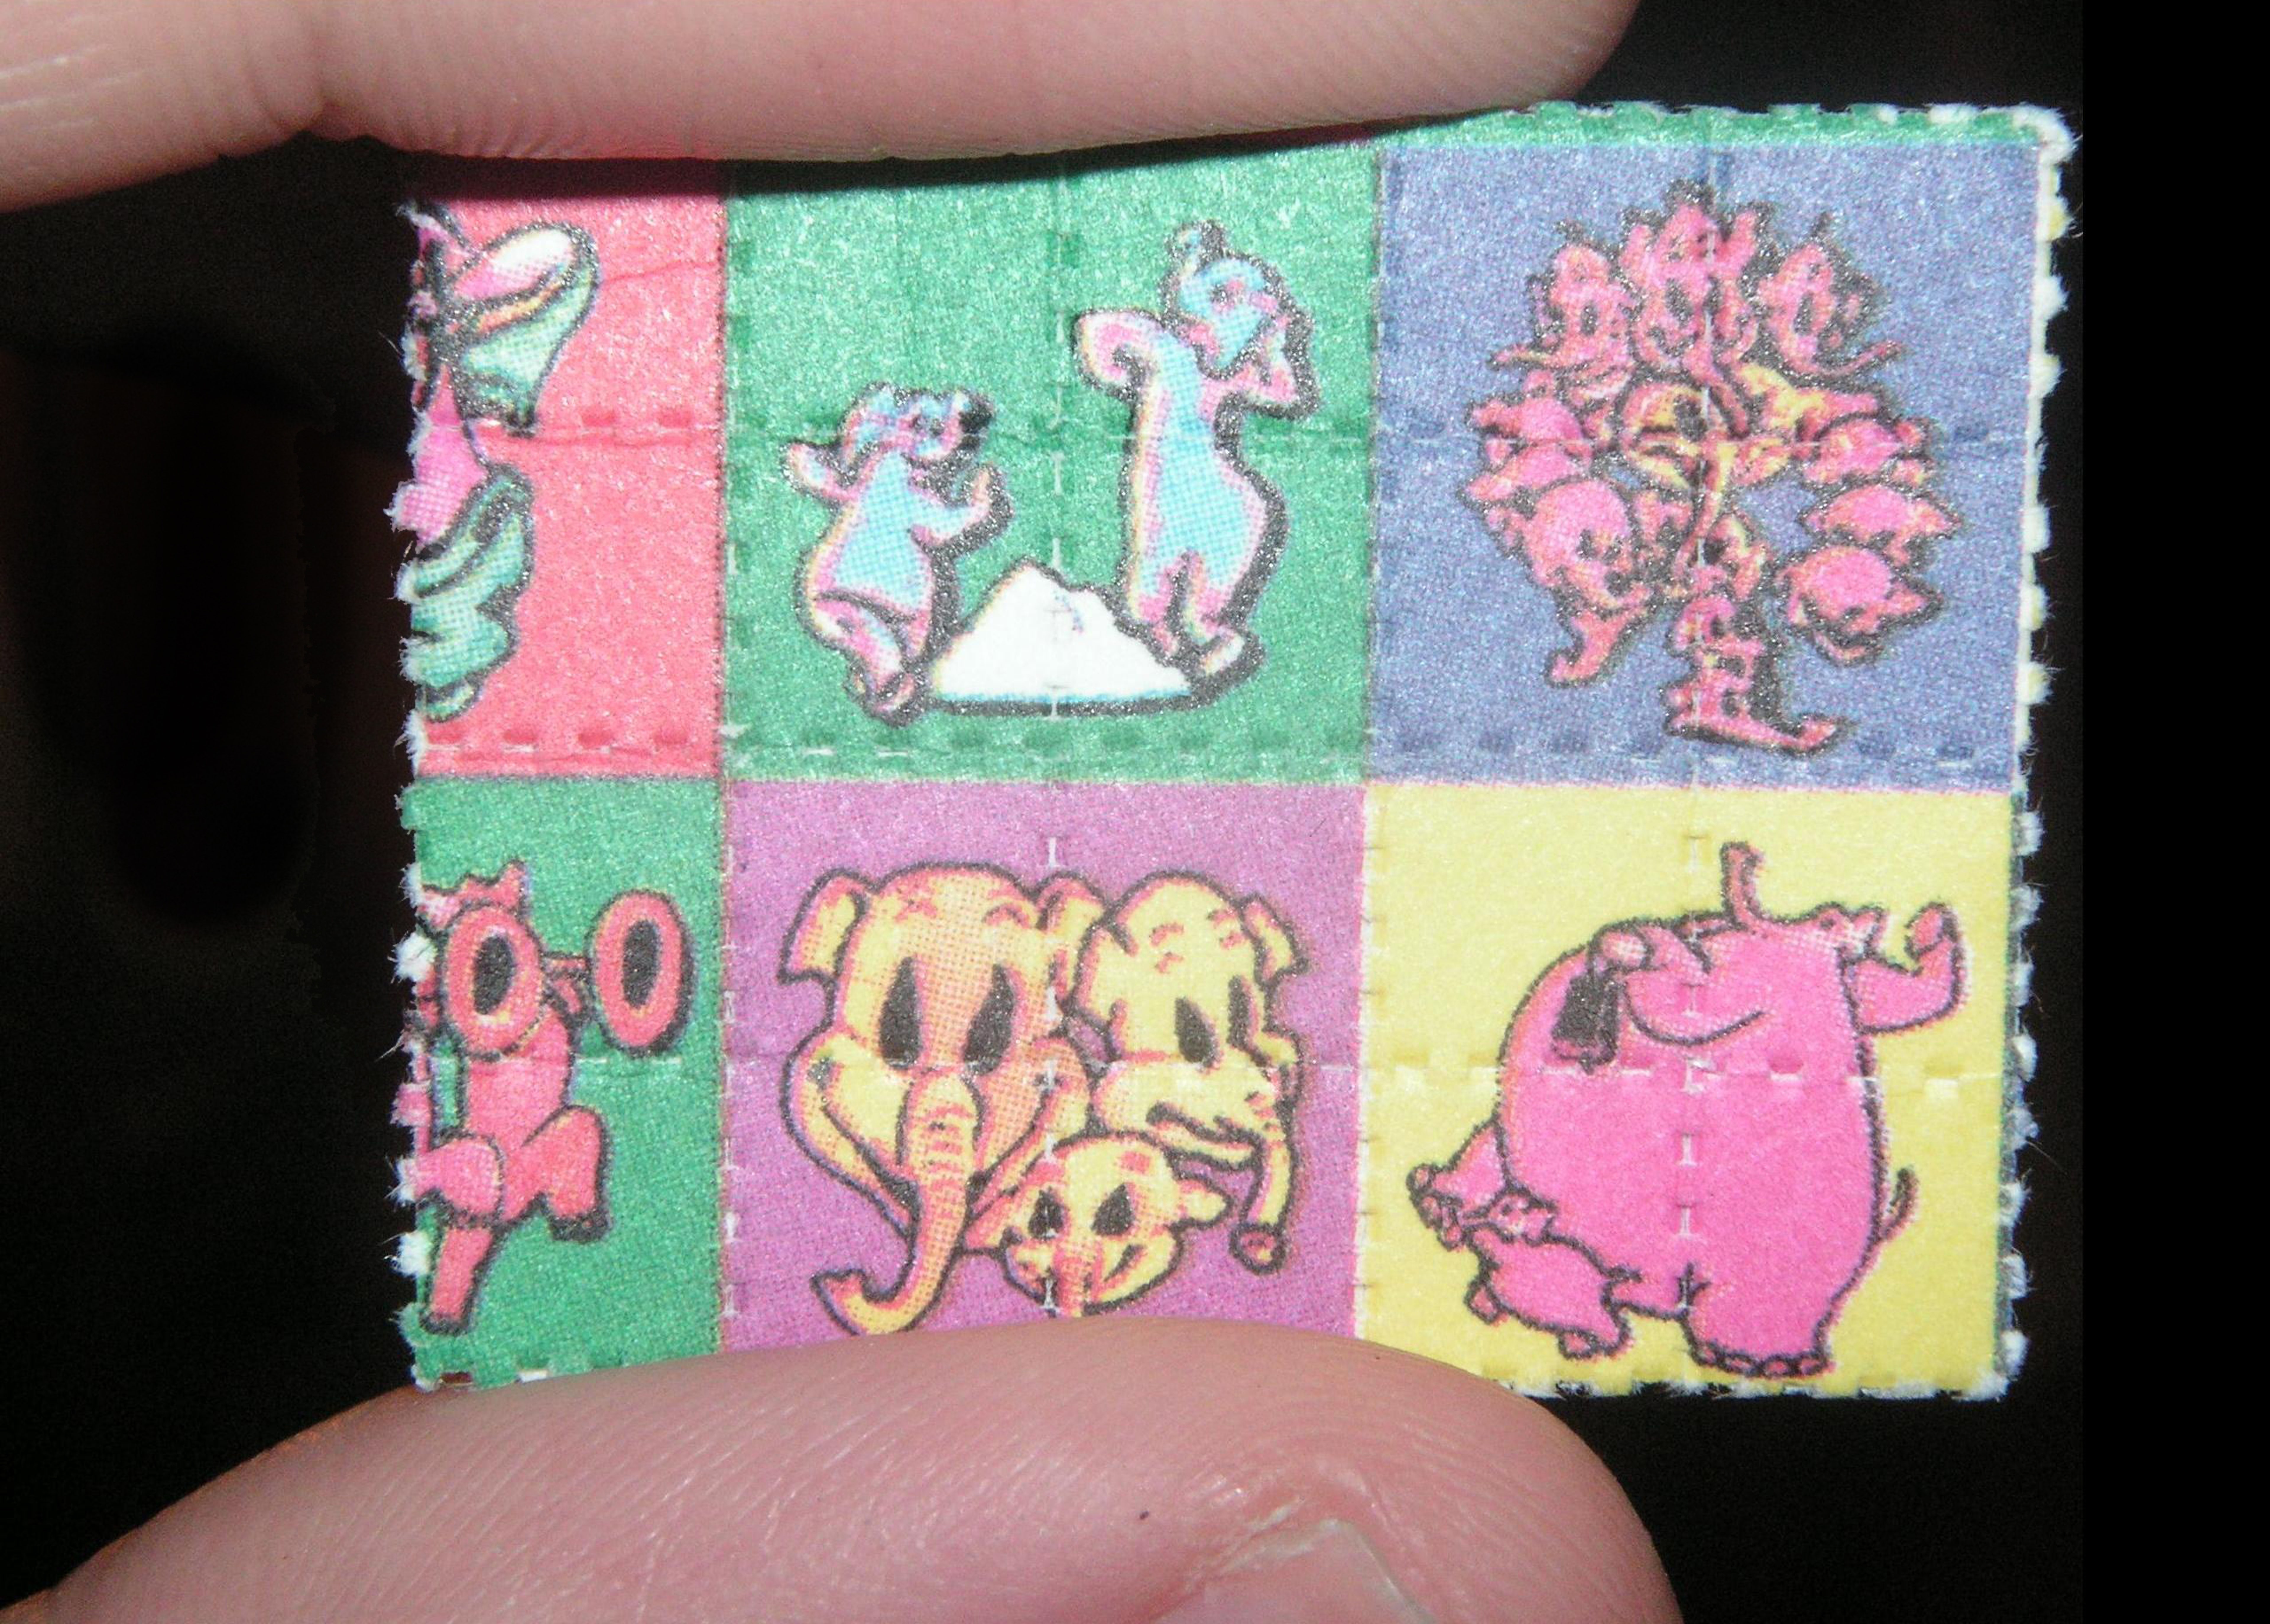 Study Points Towards Possible Cognitive Benefits Of LSD Microdosing